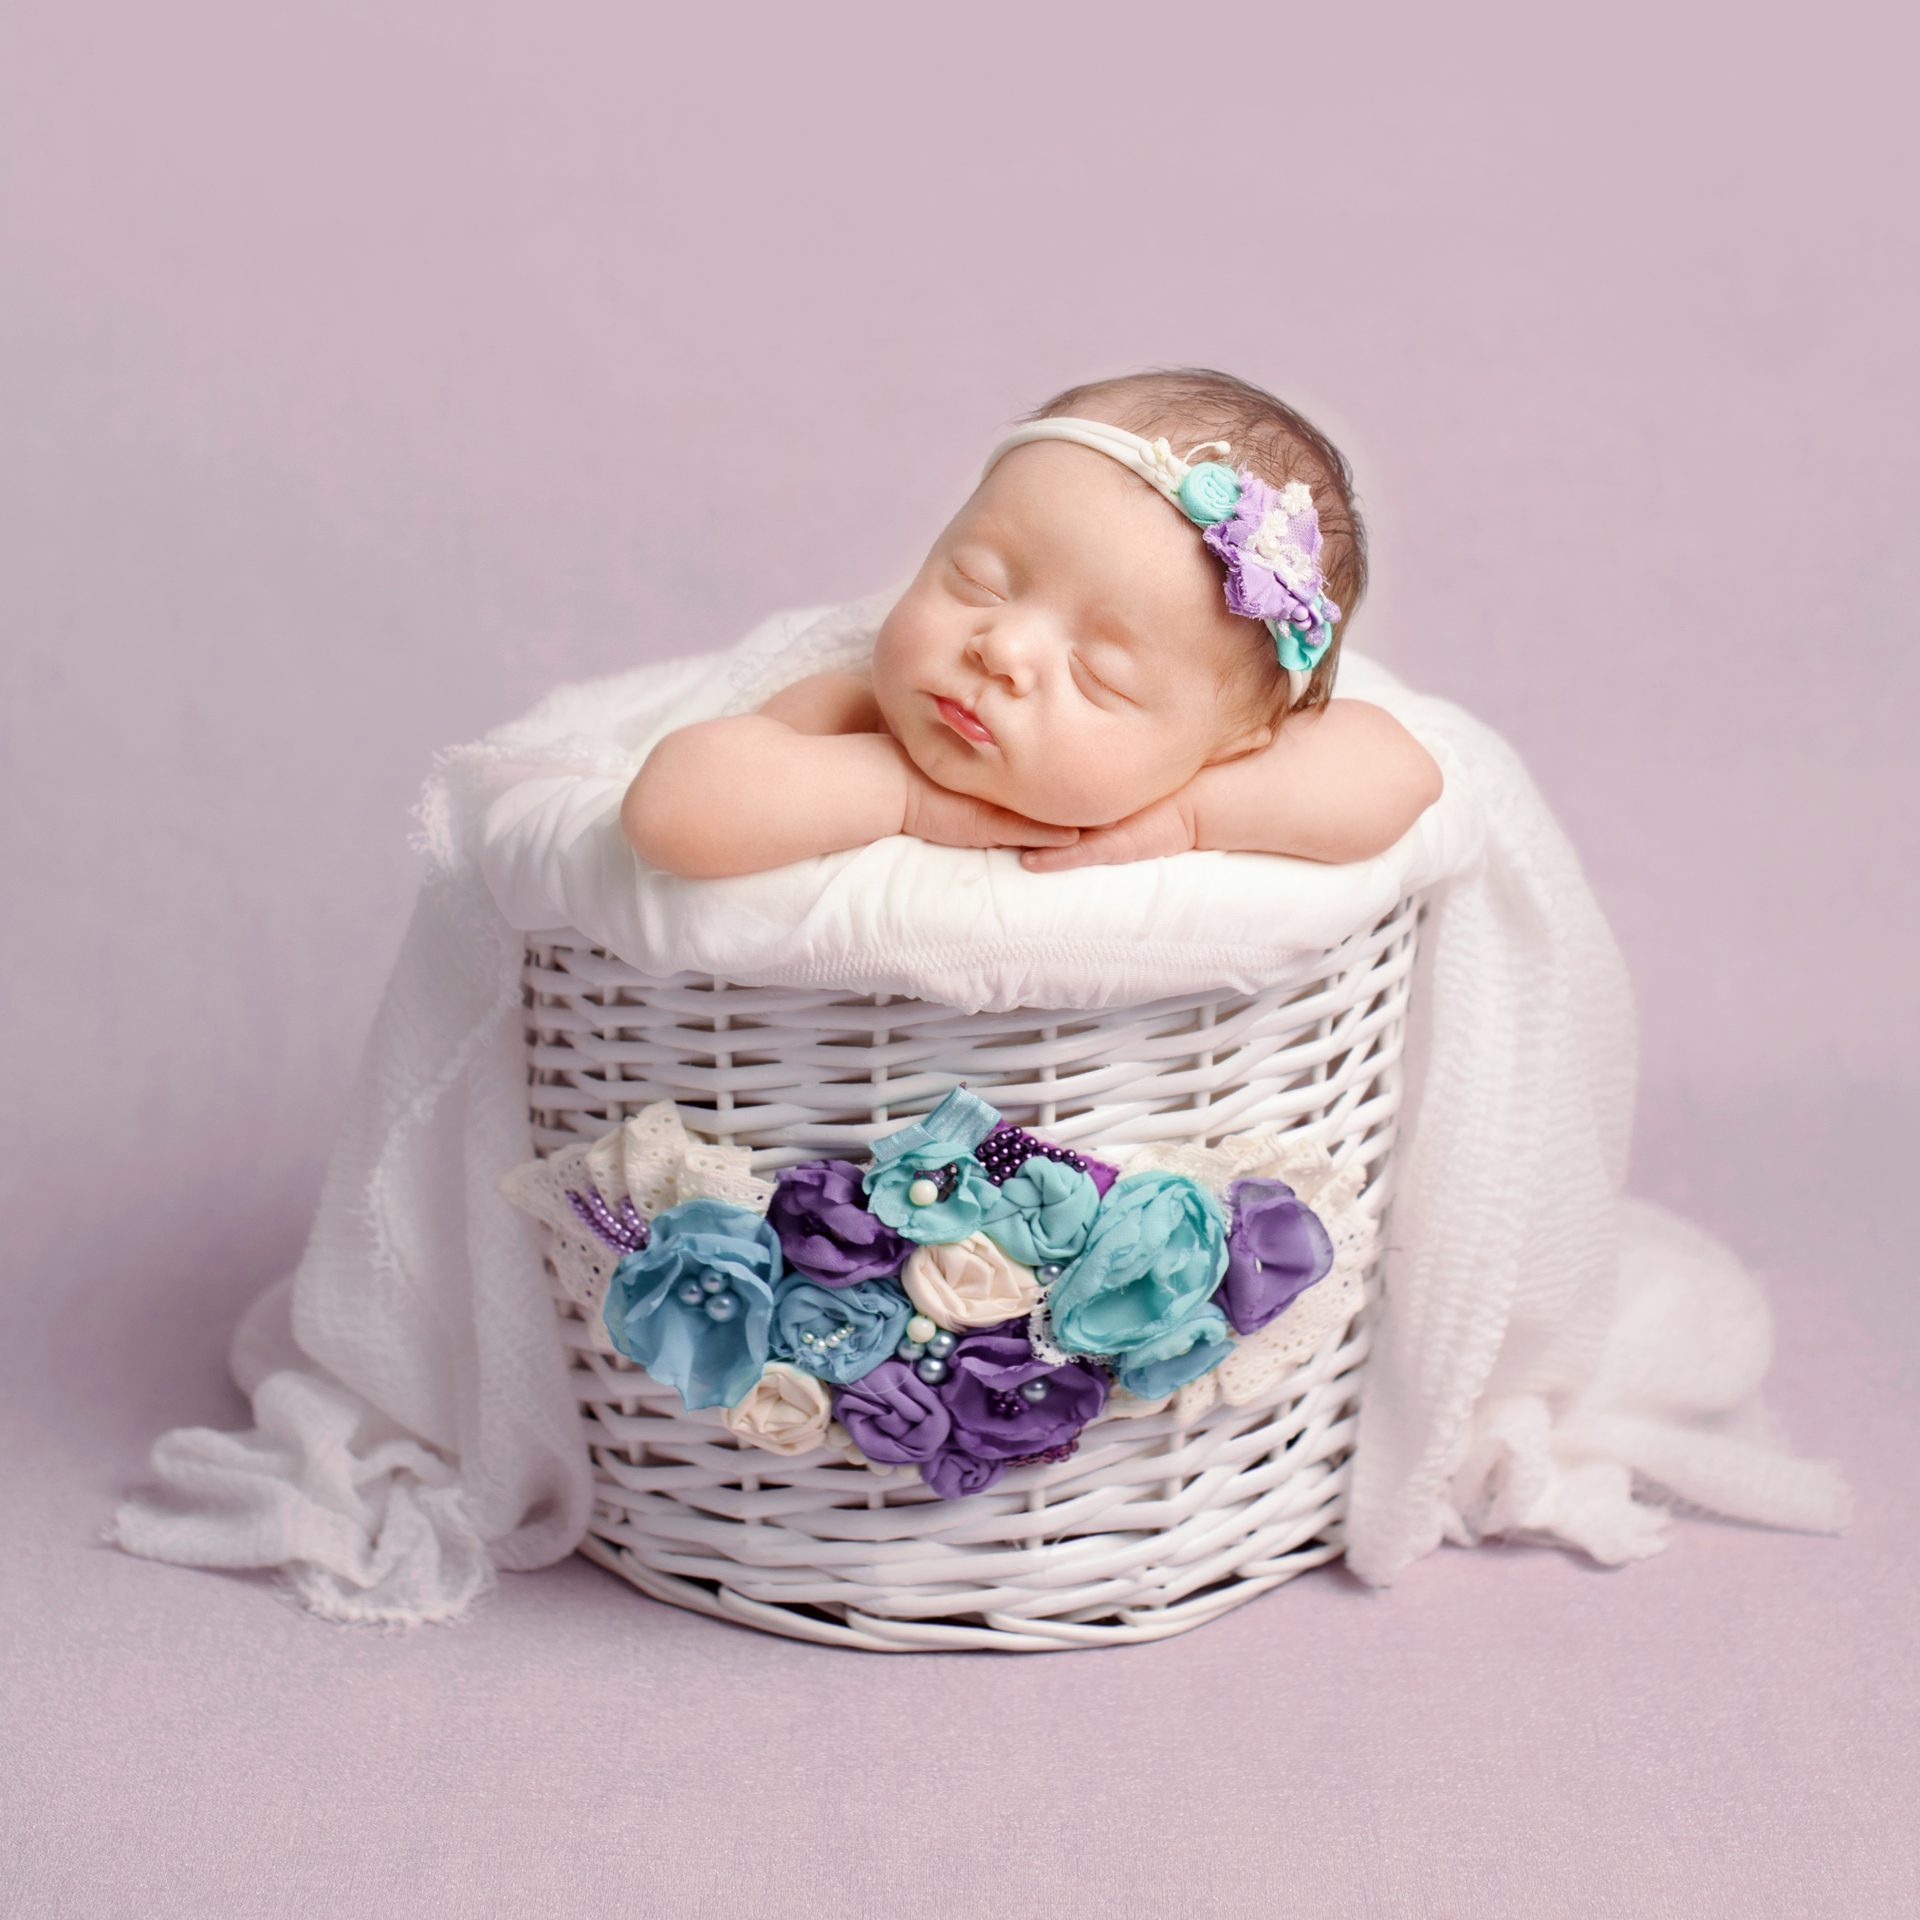 https://klinestudios.com/wp-content/uploads/2022/09/Beautiful-newborn-baby-in-basket-photography-for-northampton-and-corby.jpg